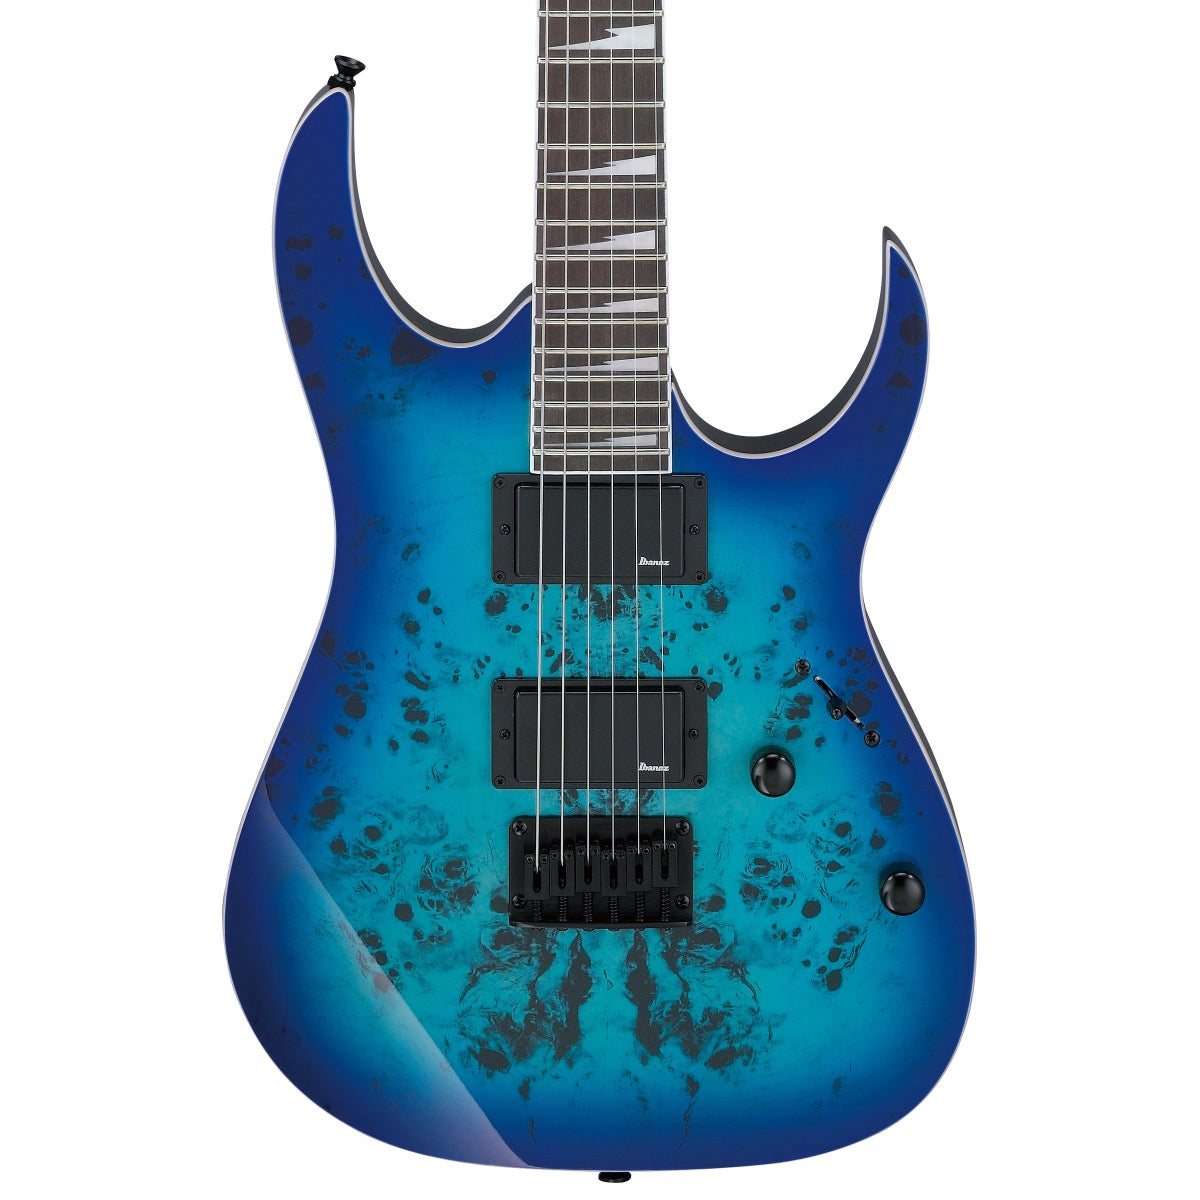 Close-up top view of Ibanez GRGR221PA GIO Electric Guitar - Aqua Burst showing body and portion of fingerboard